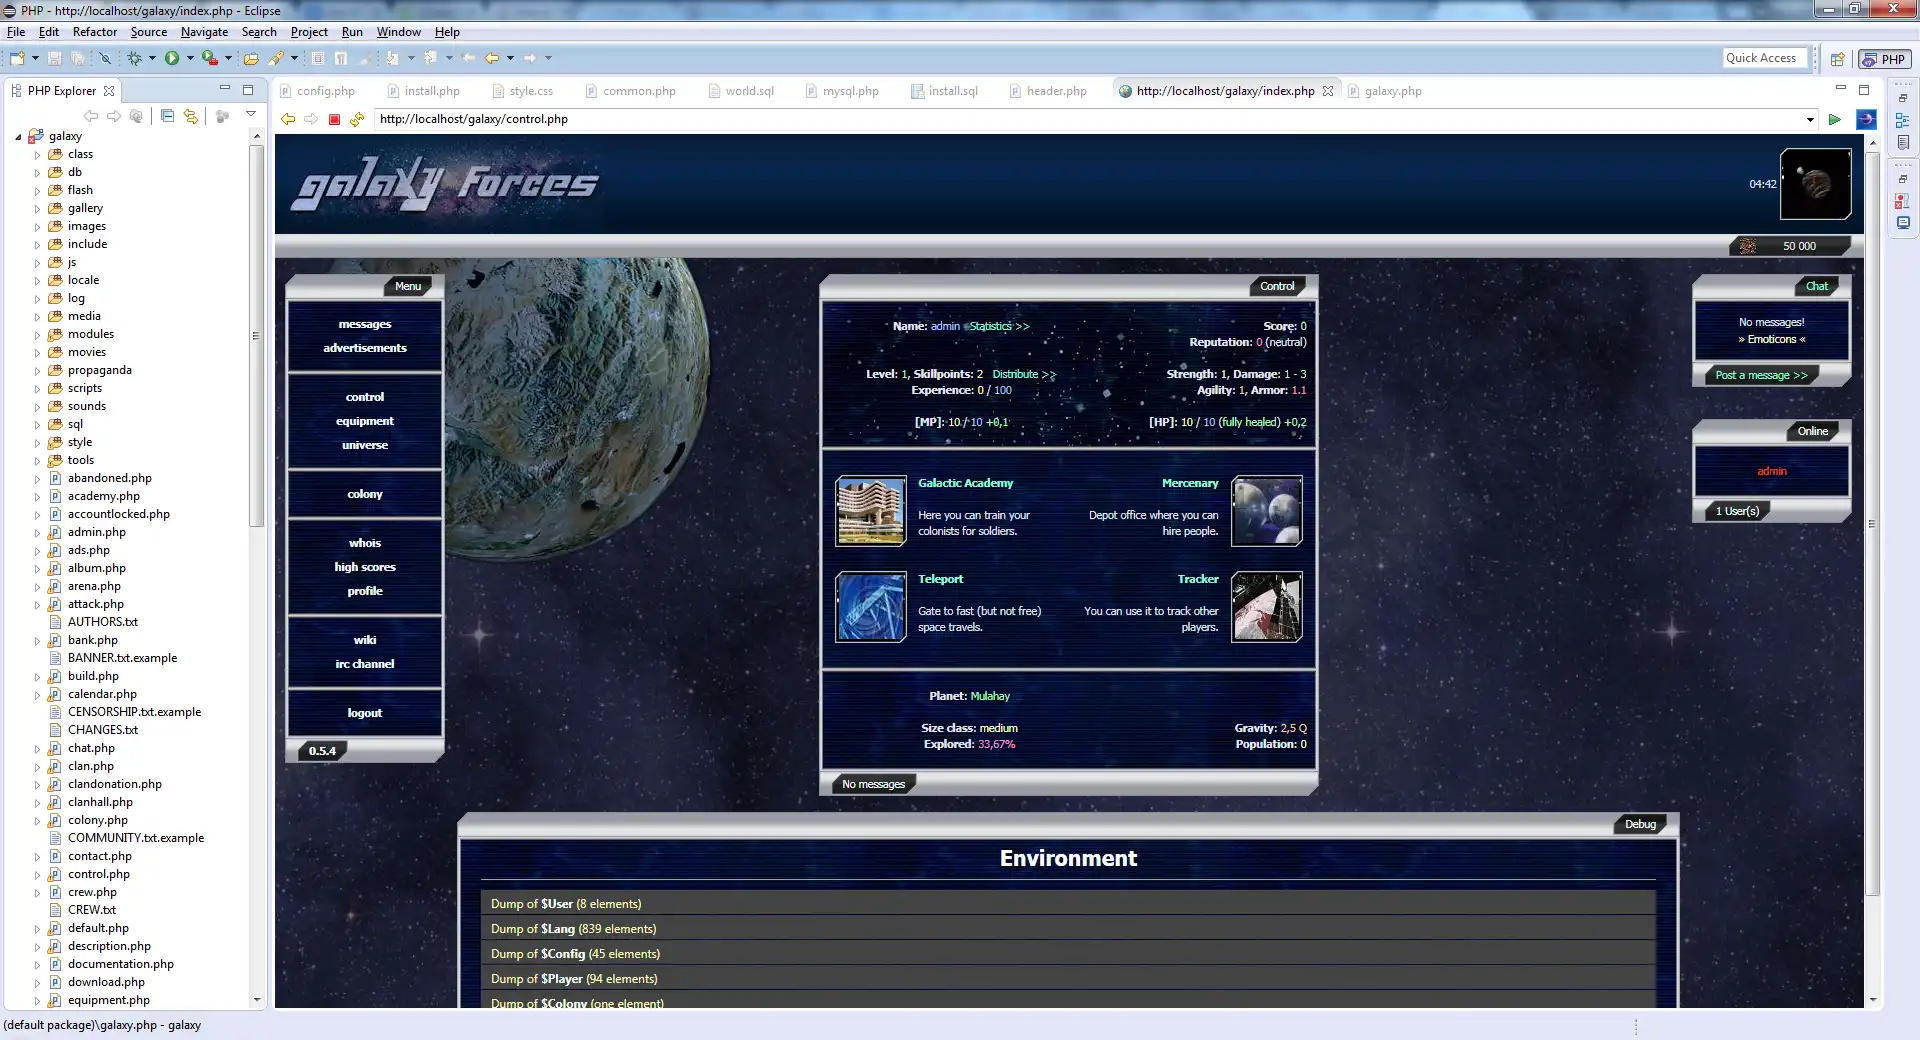 Download web tool or web app Galaxy Forces MMORPG to run in Windows online over Linux online